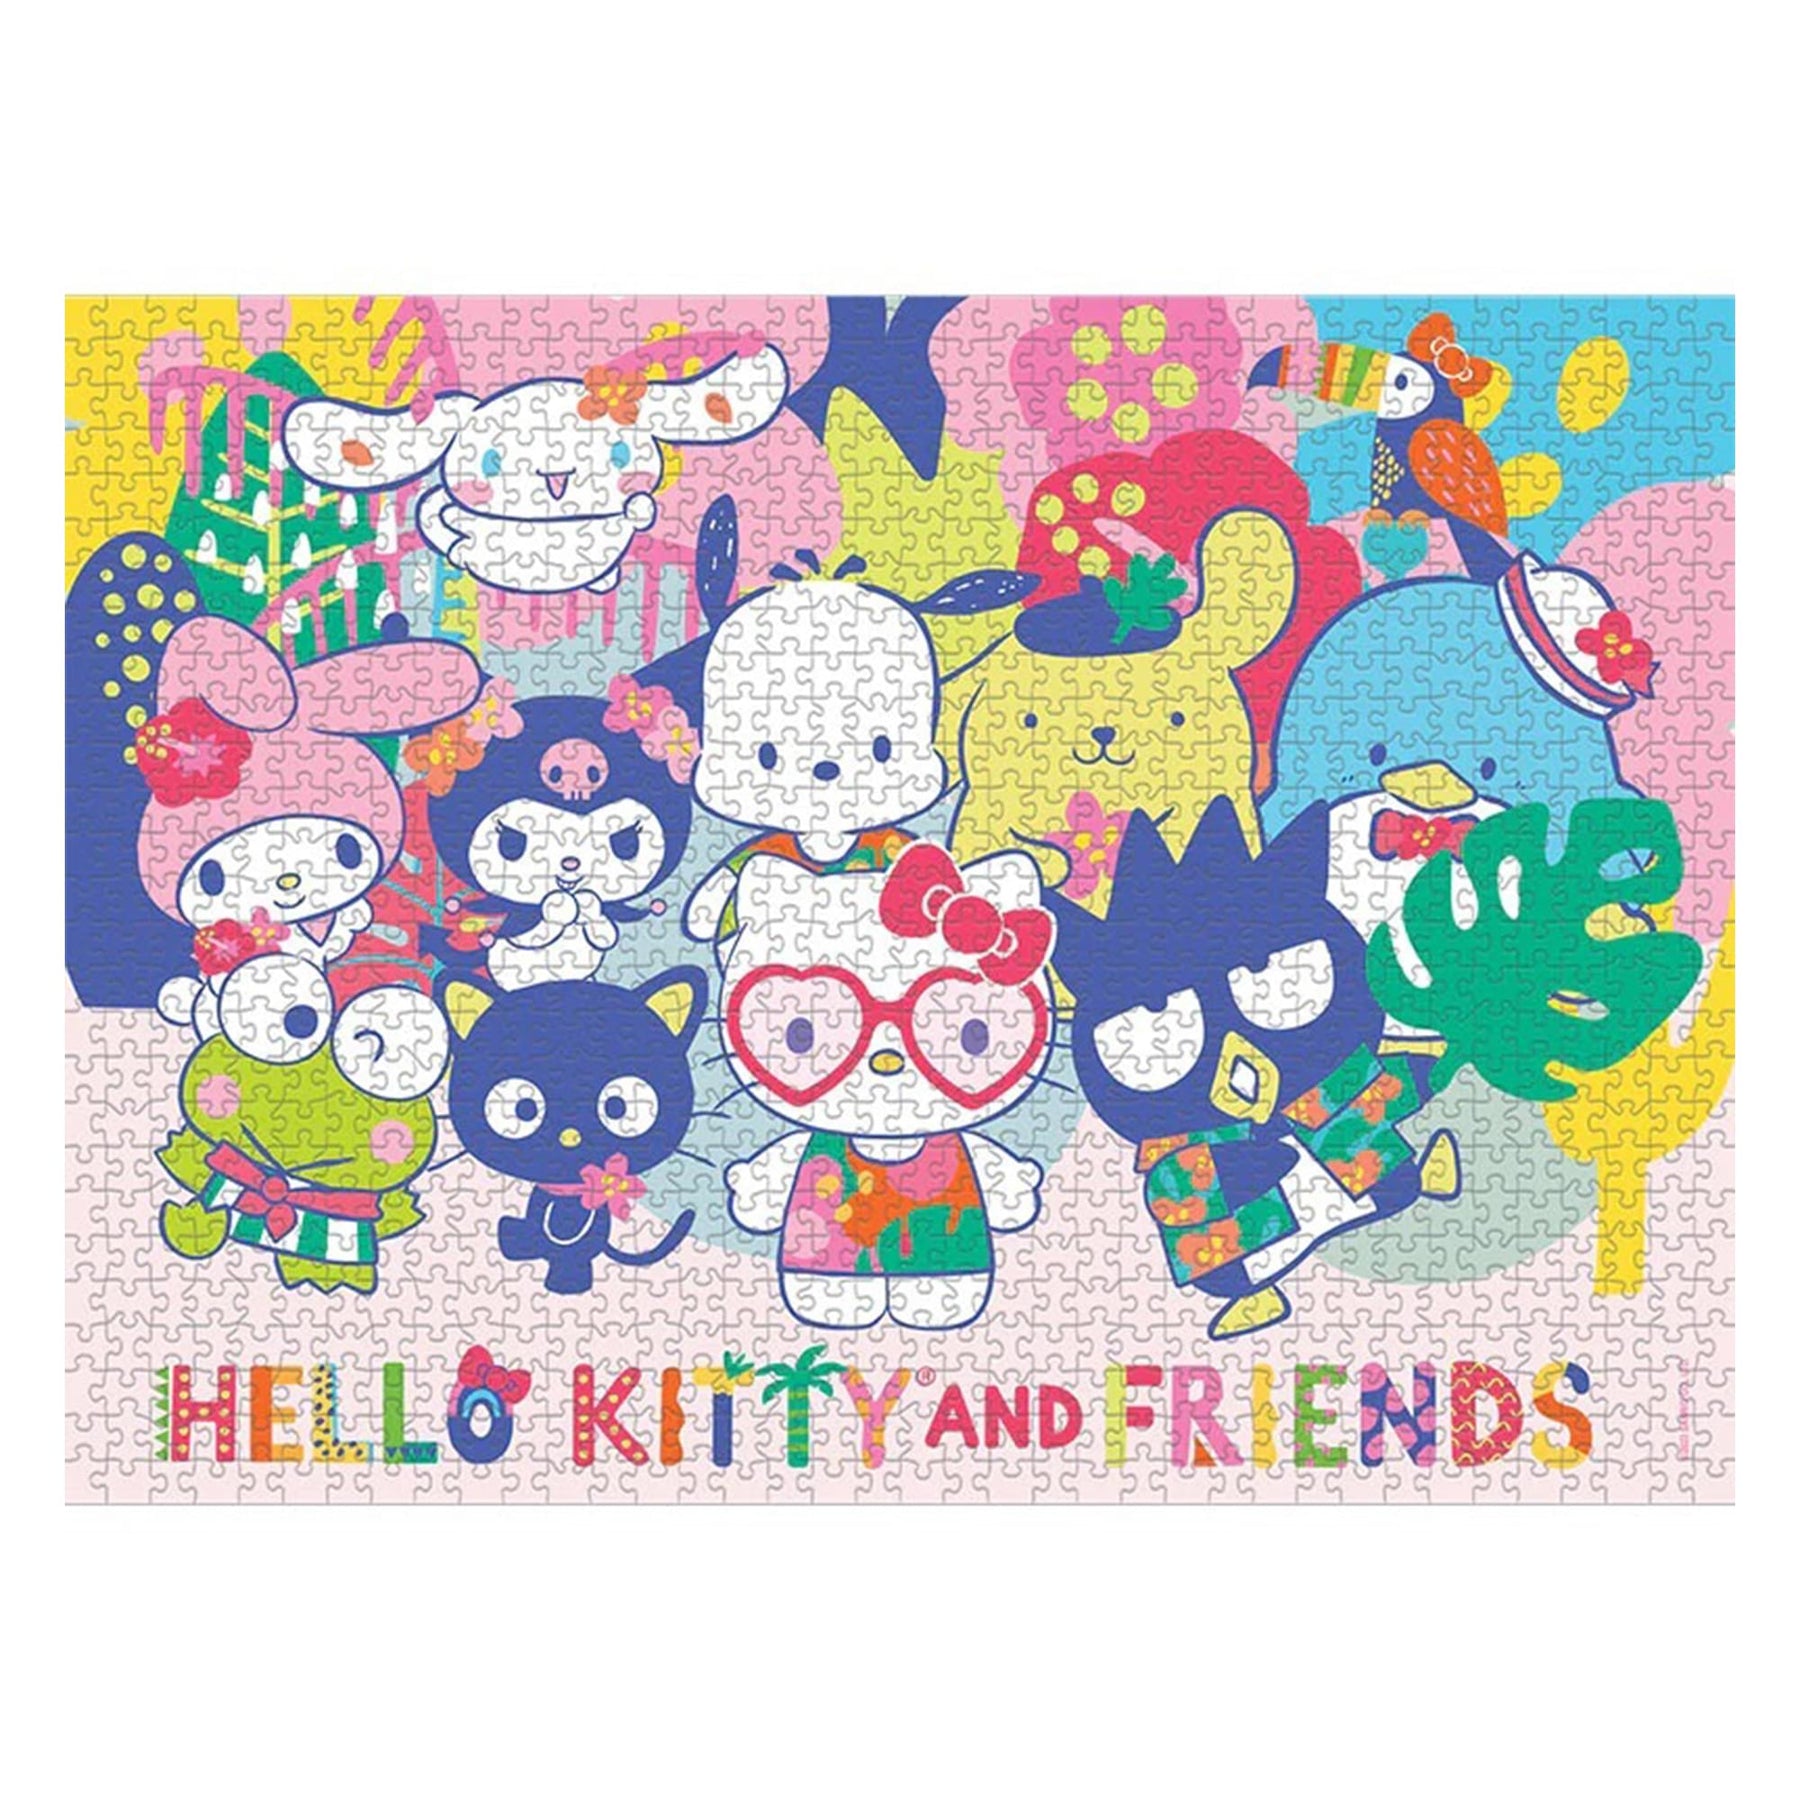 Sanrio Hello Kitty and Friends "Tropical Times" 1000 Piece Jigsaw Puzzle